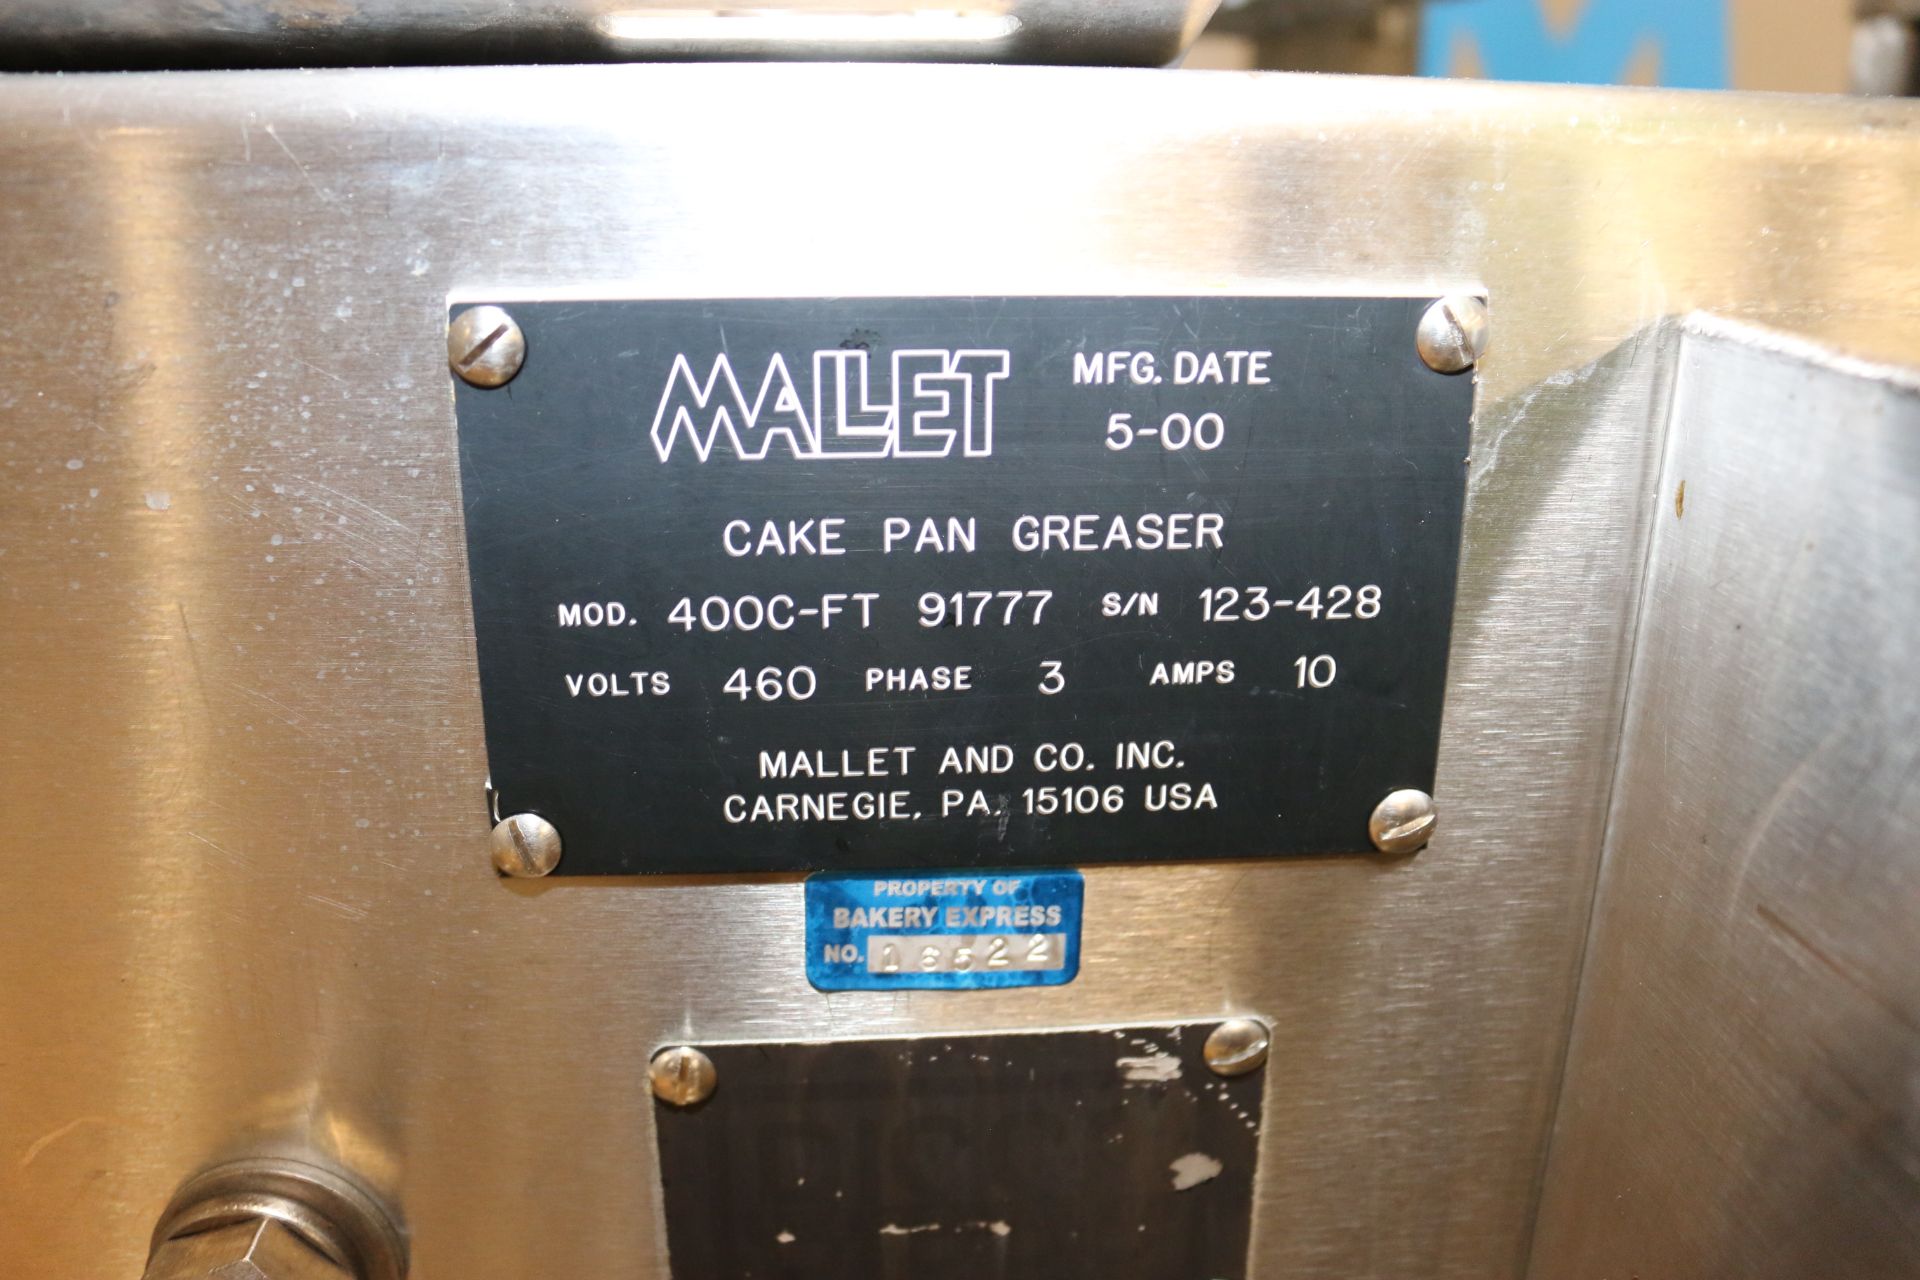 Mallet S/S Cake Pan Greaser, M/N 400C-FT 91777, S/N 123-428, 460 Volts, 3 Phase, with Touchscreen - Image 10 of 12